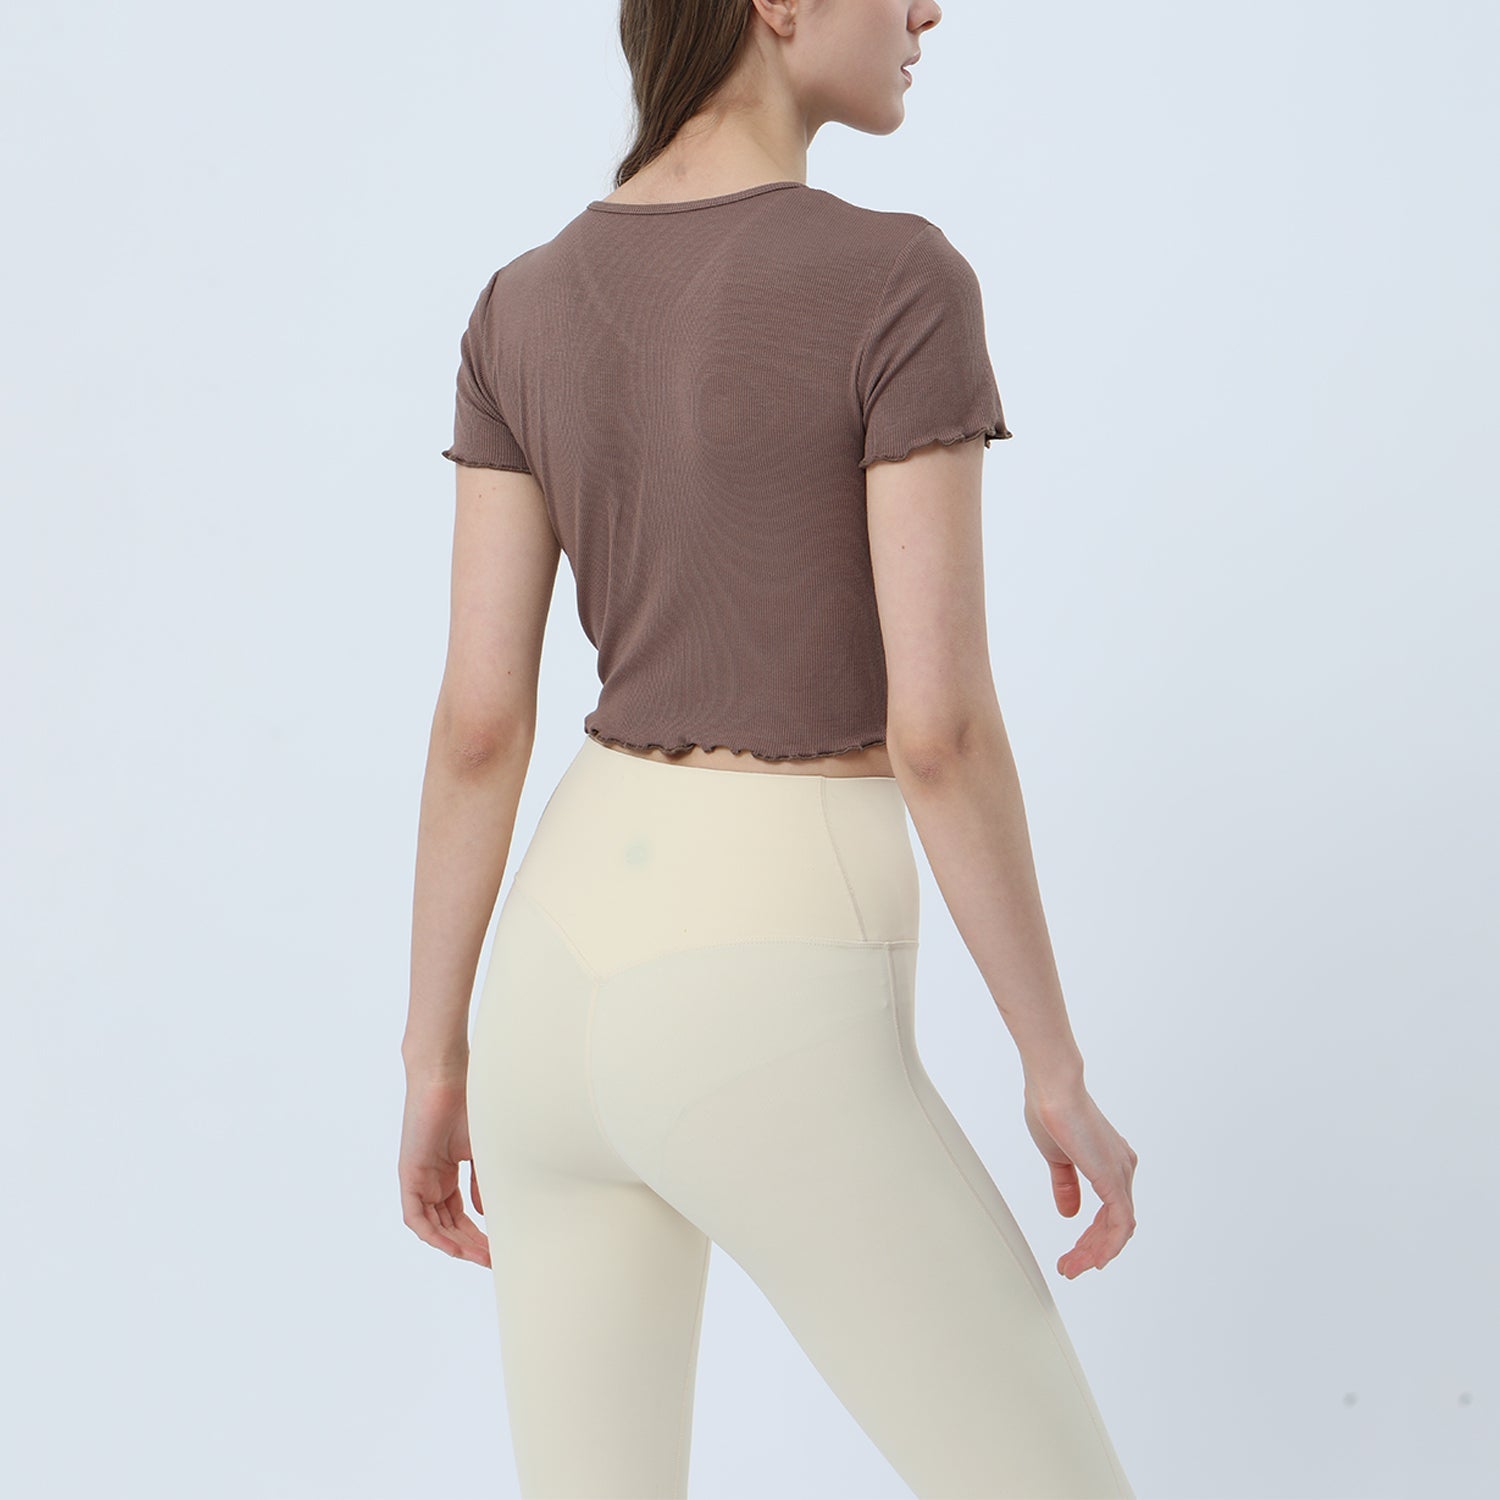 Ruched Yoga Sports Top